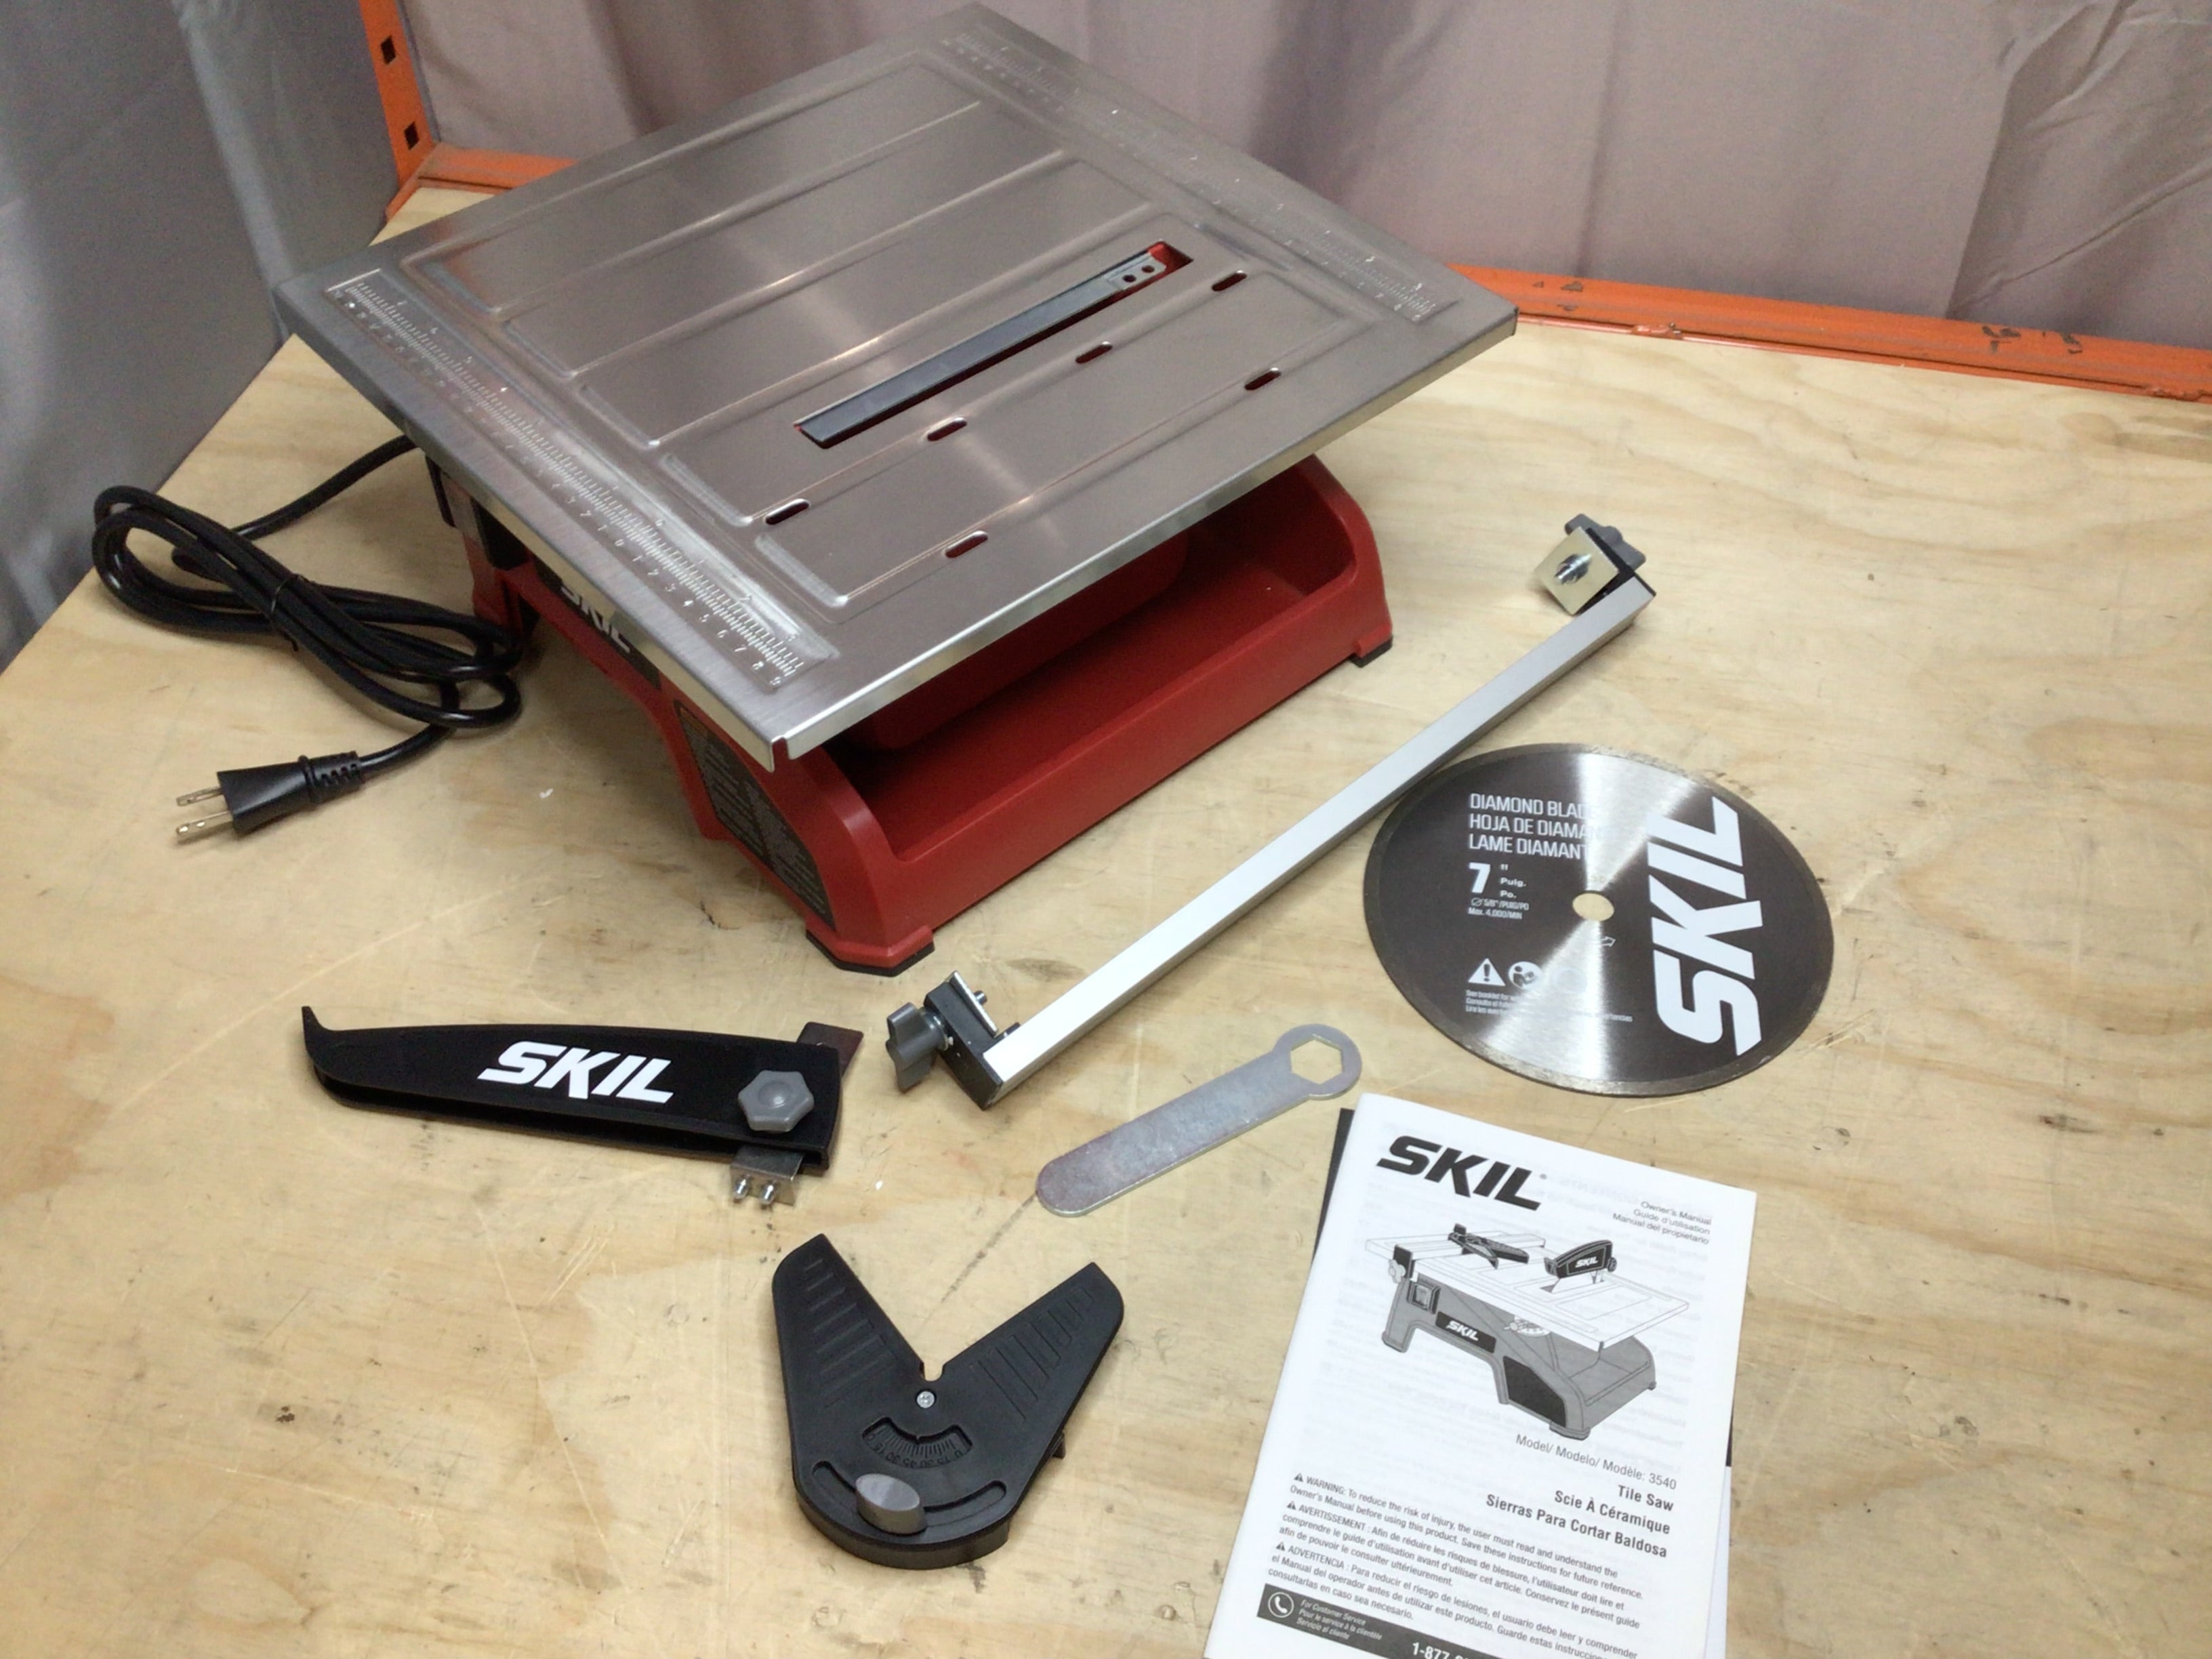 SKIL 7-Inch Wet Tile Saw (3540-02) Stainless Steel Table *OPEN BOX* (8141289586926)